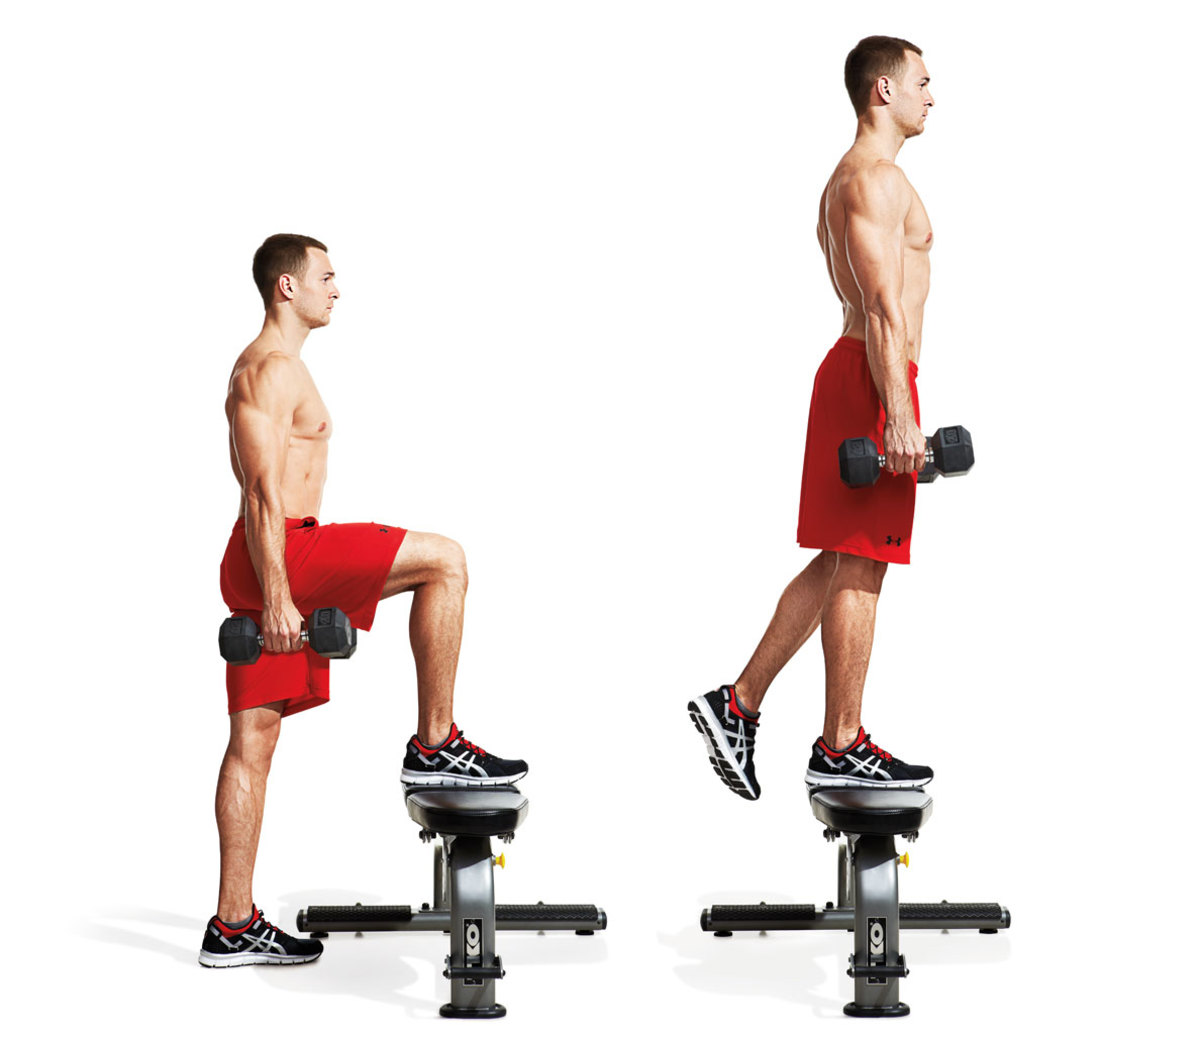 9 Stepup Workout Variations for Leg Strength and Power, Fitness